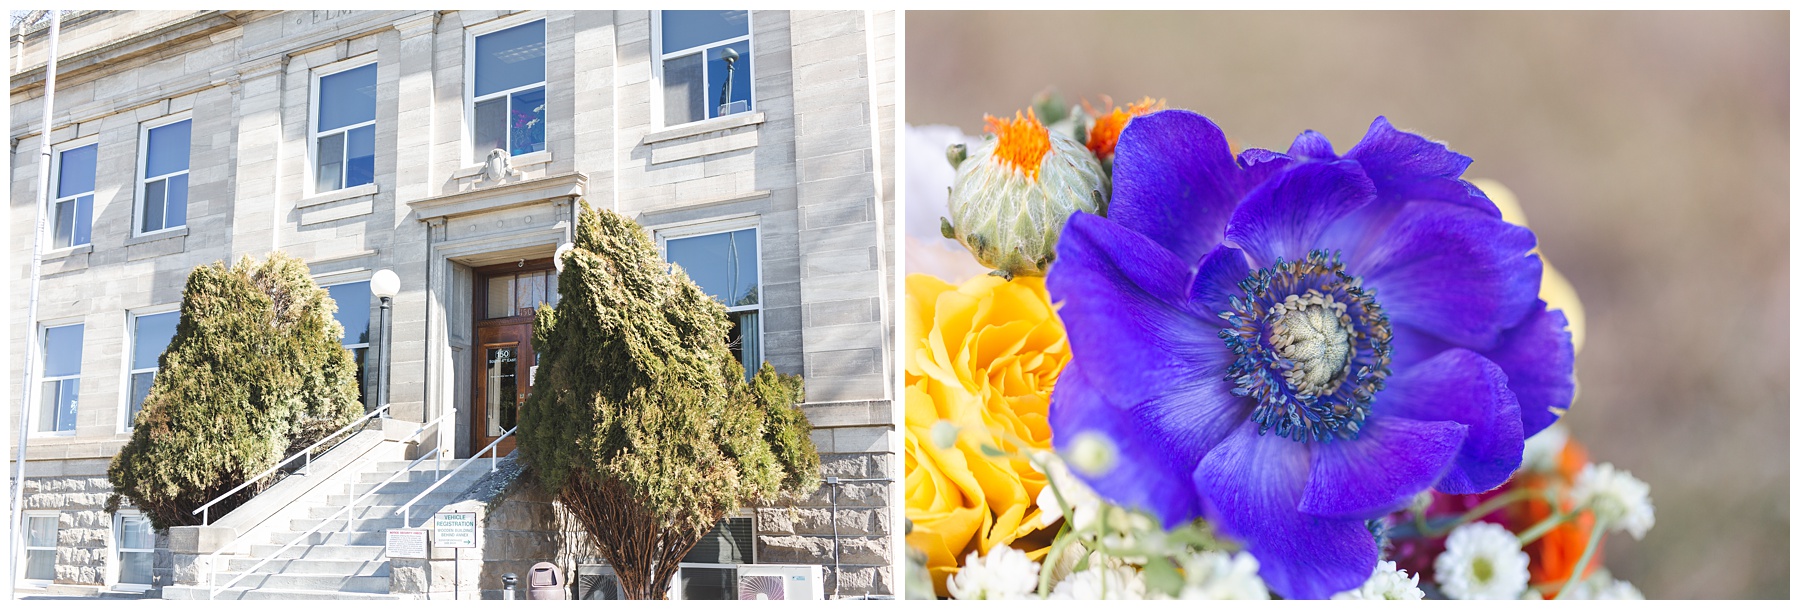 Courthouse and blue flower